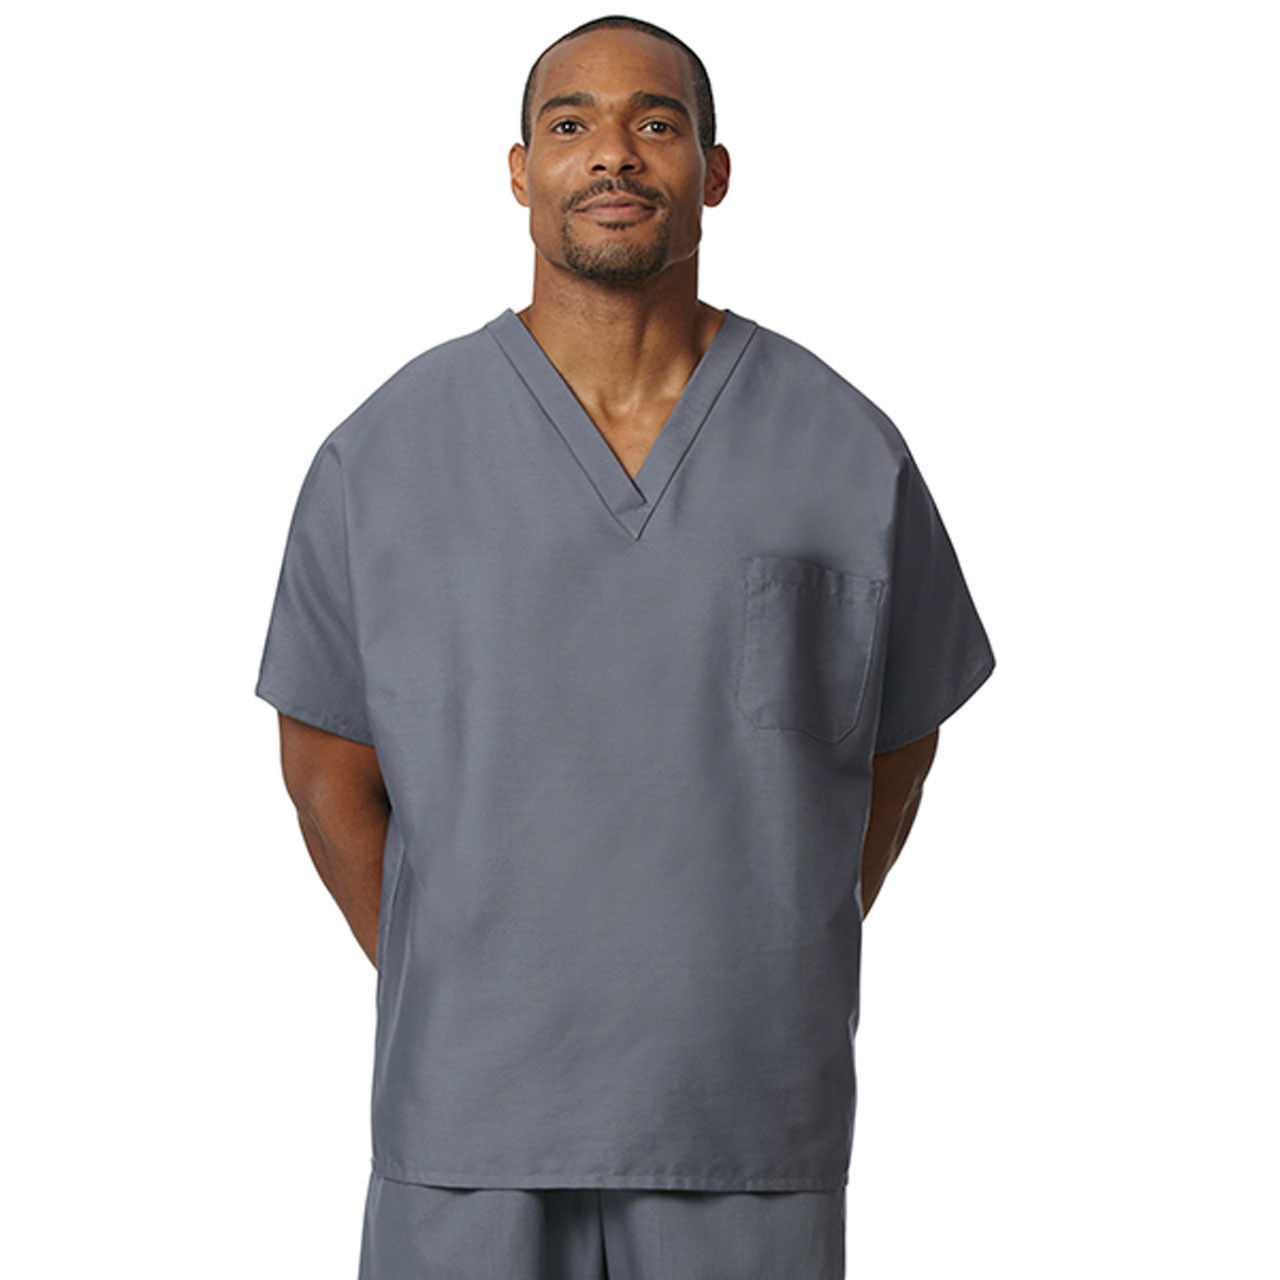 Is there any extra storage space in the Gray Scrub Tops?